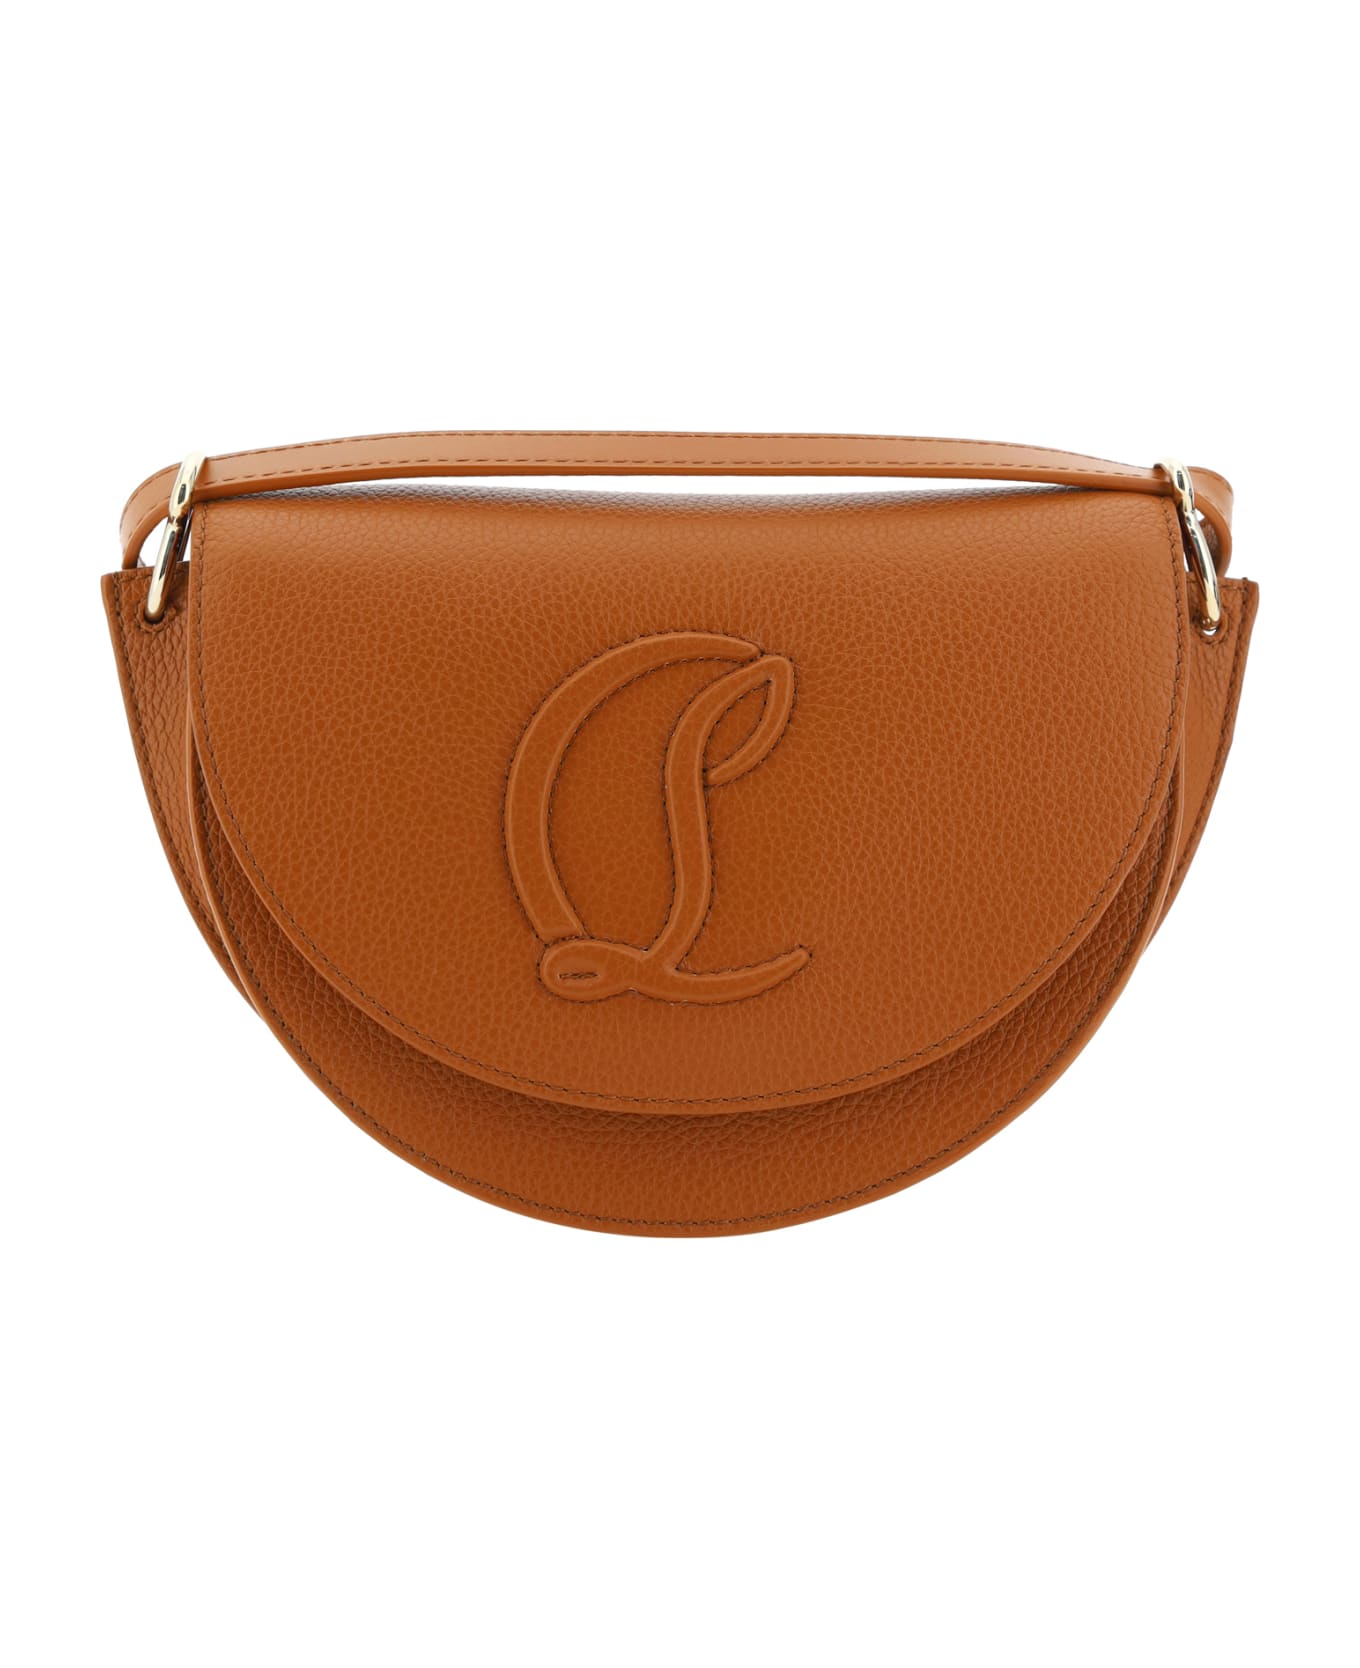 Christian Louboutin By My Side Crossbody Bag - Cuoio/cuoio トートバッグ